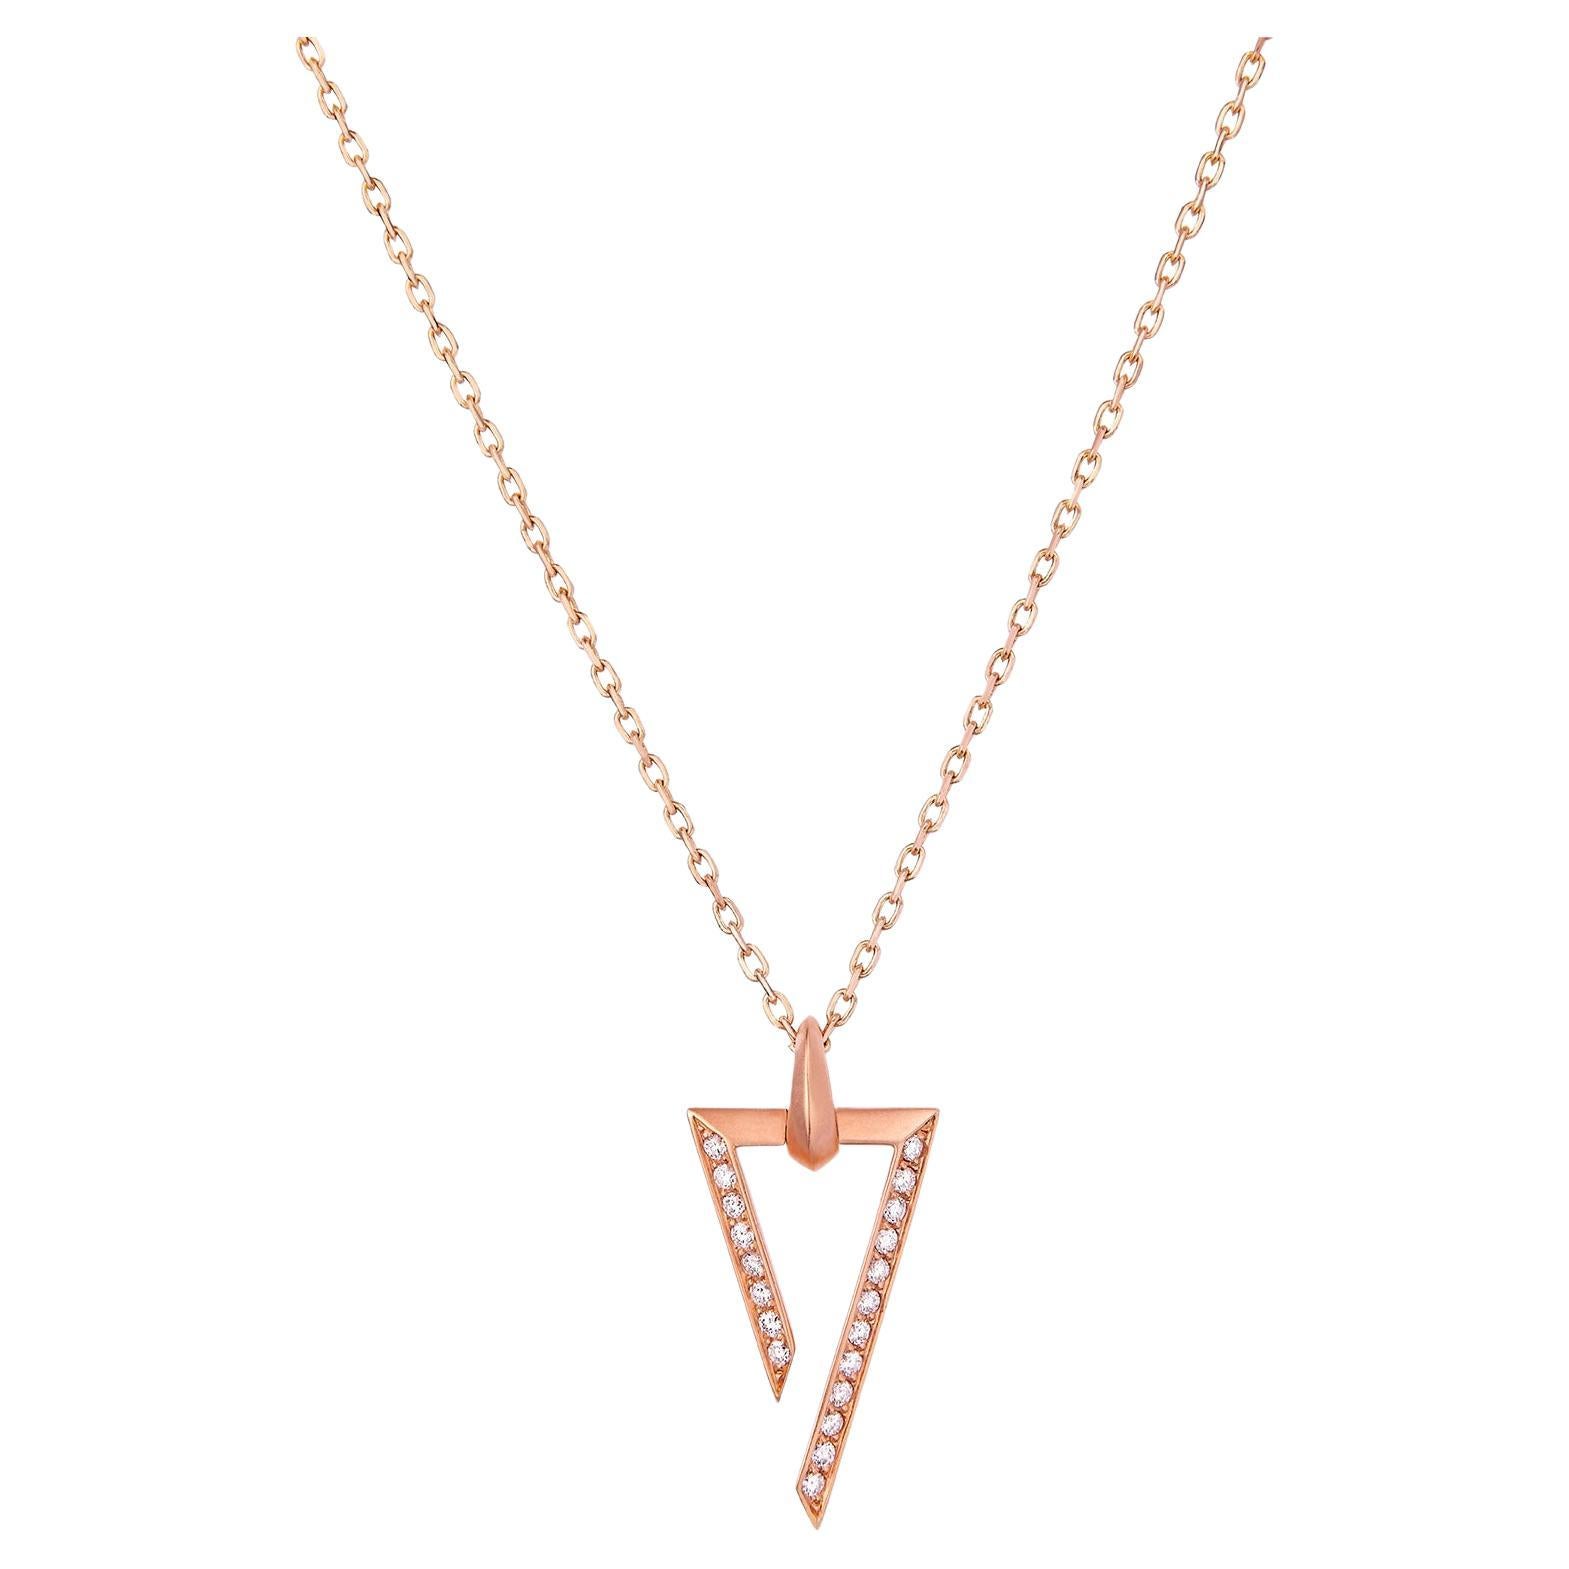 Medium Pendant with Chain Crafted in 18K Rose Gold & White Diamonds 0.31 ct.